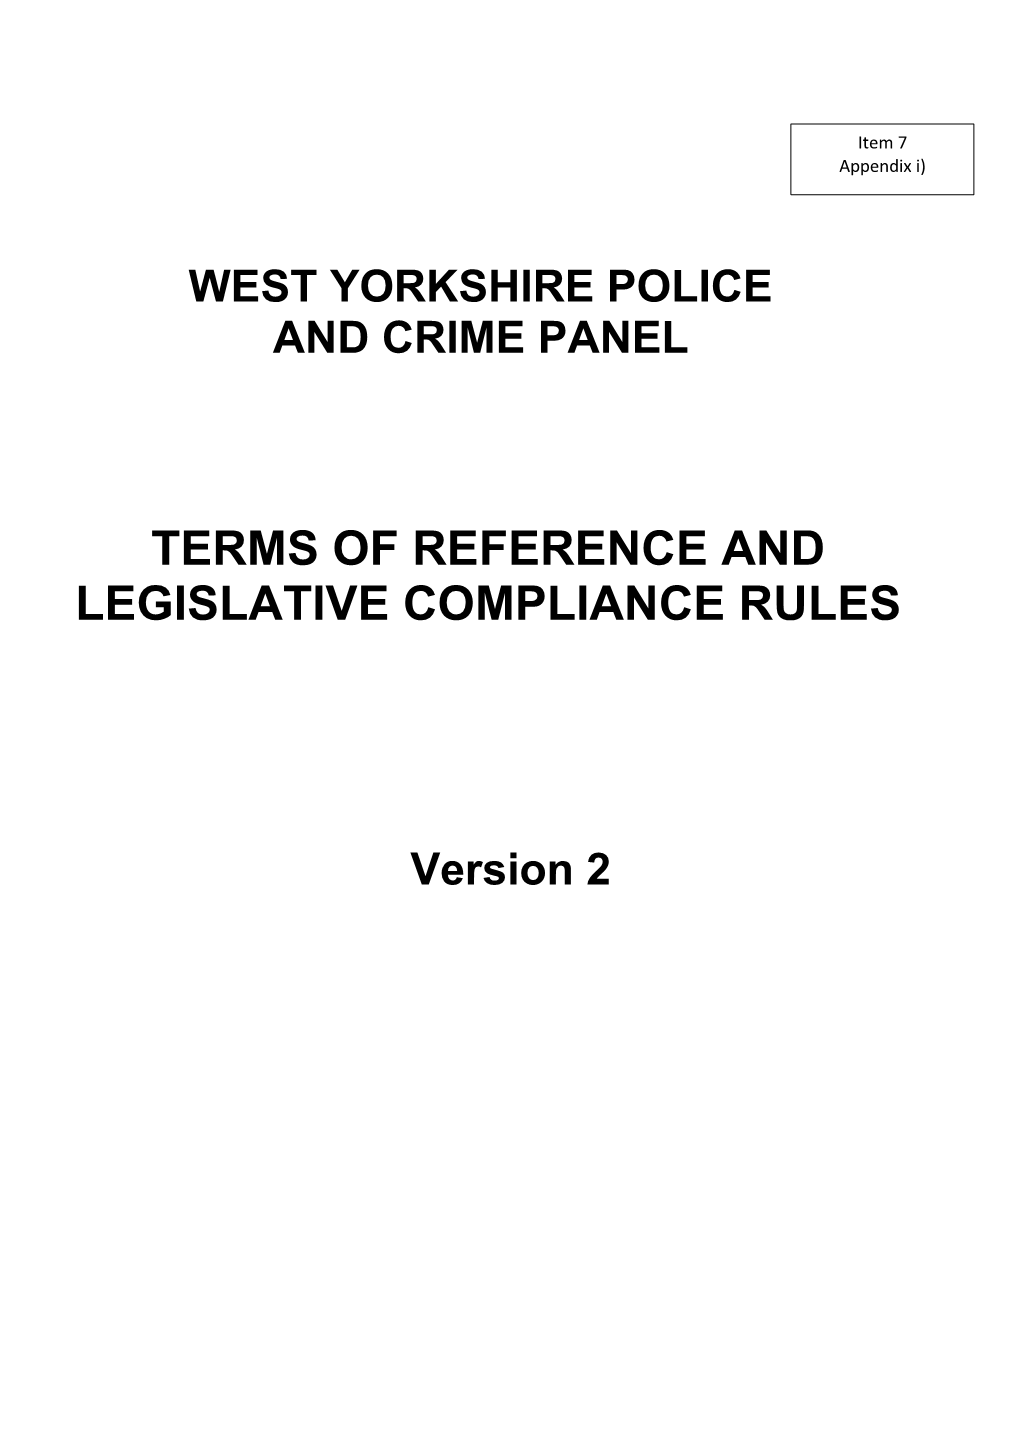 Terms of Reference and Legislative Compliance Rules